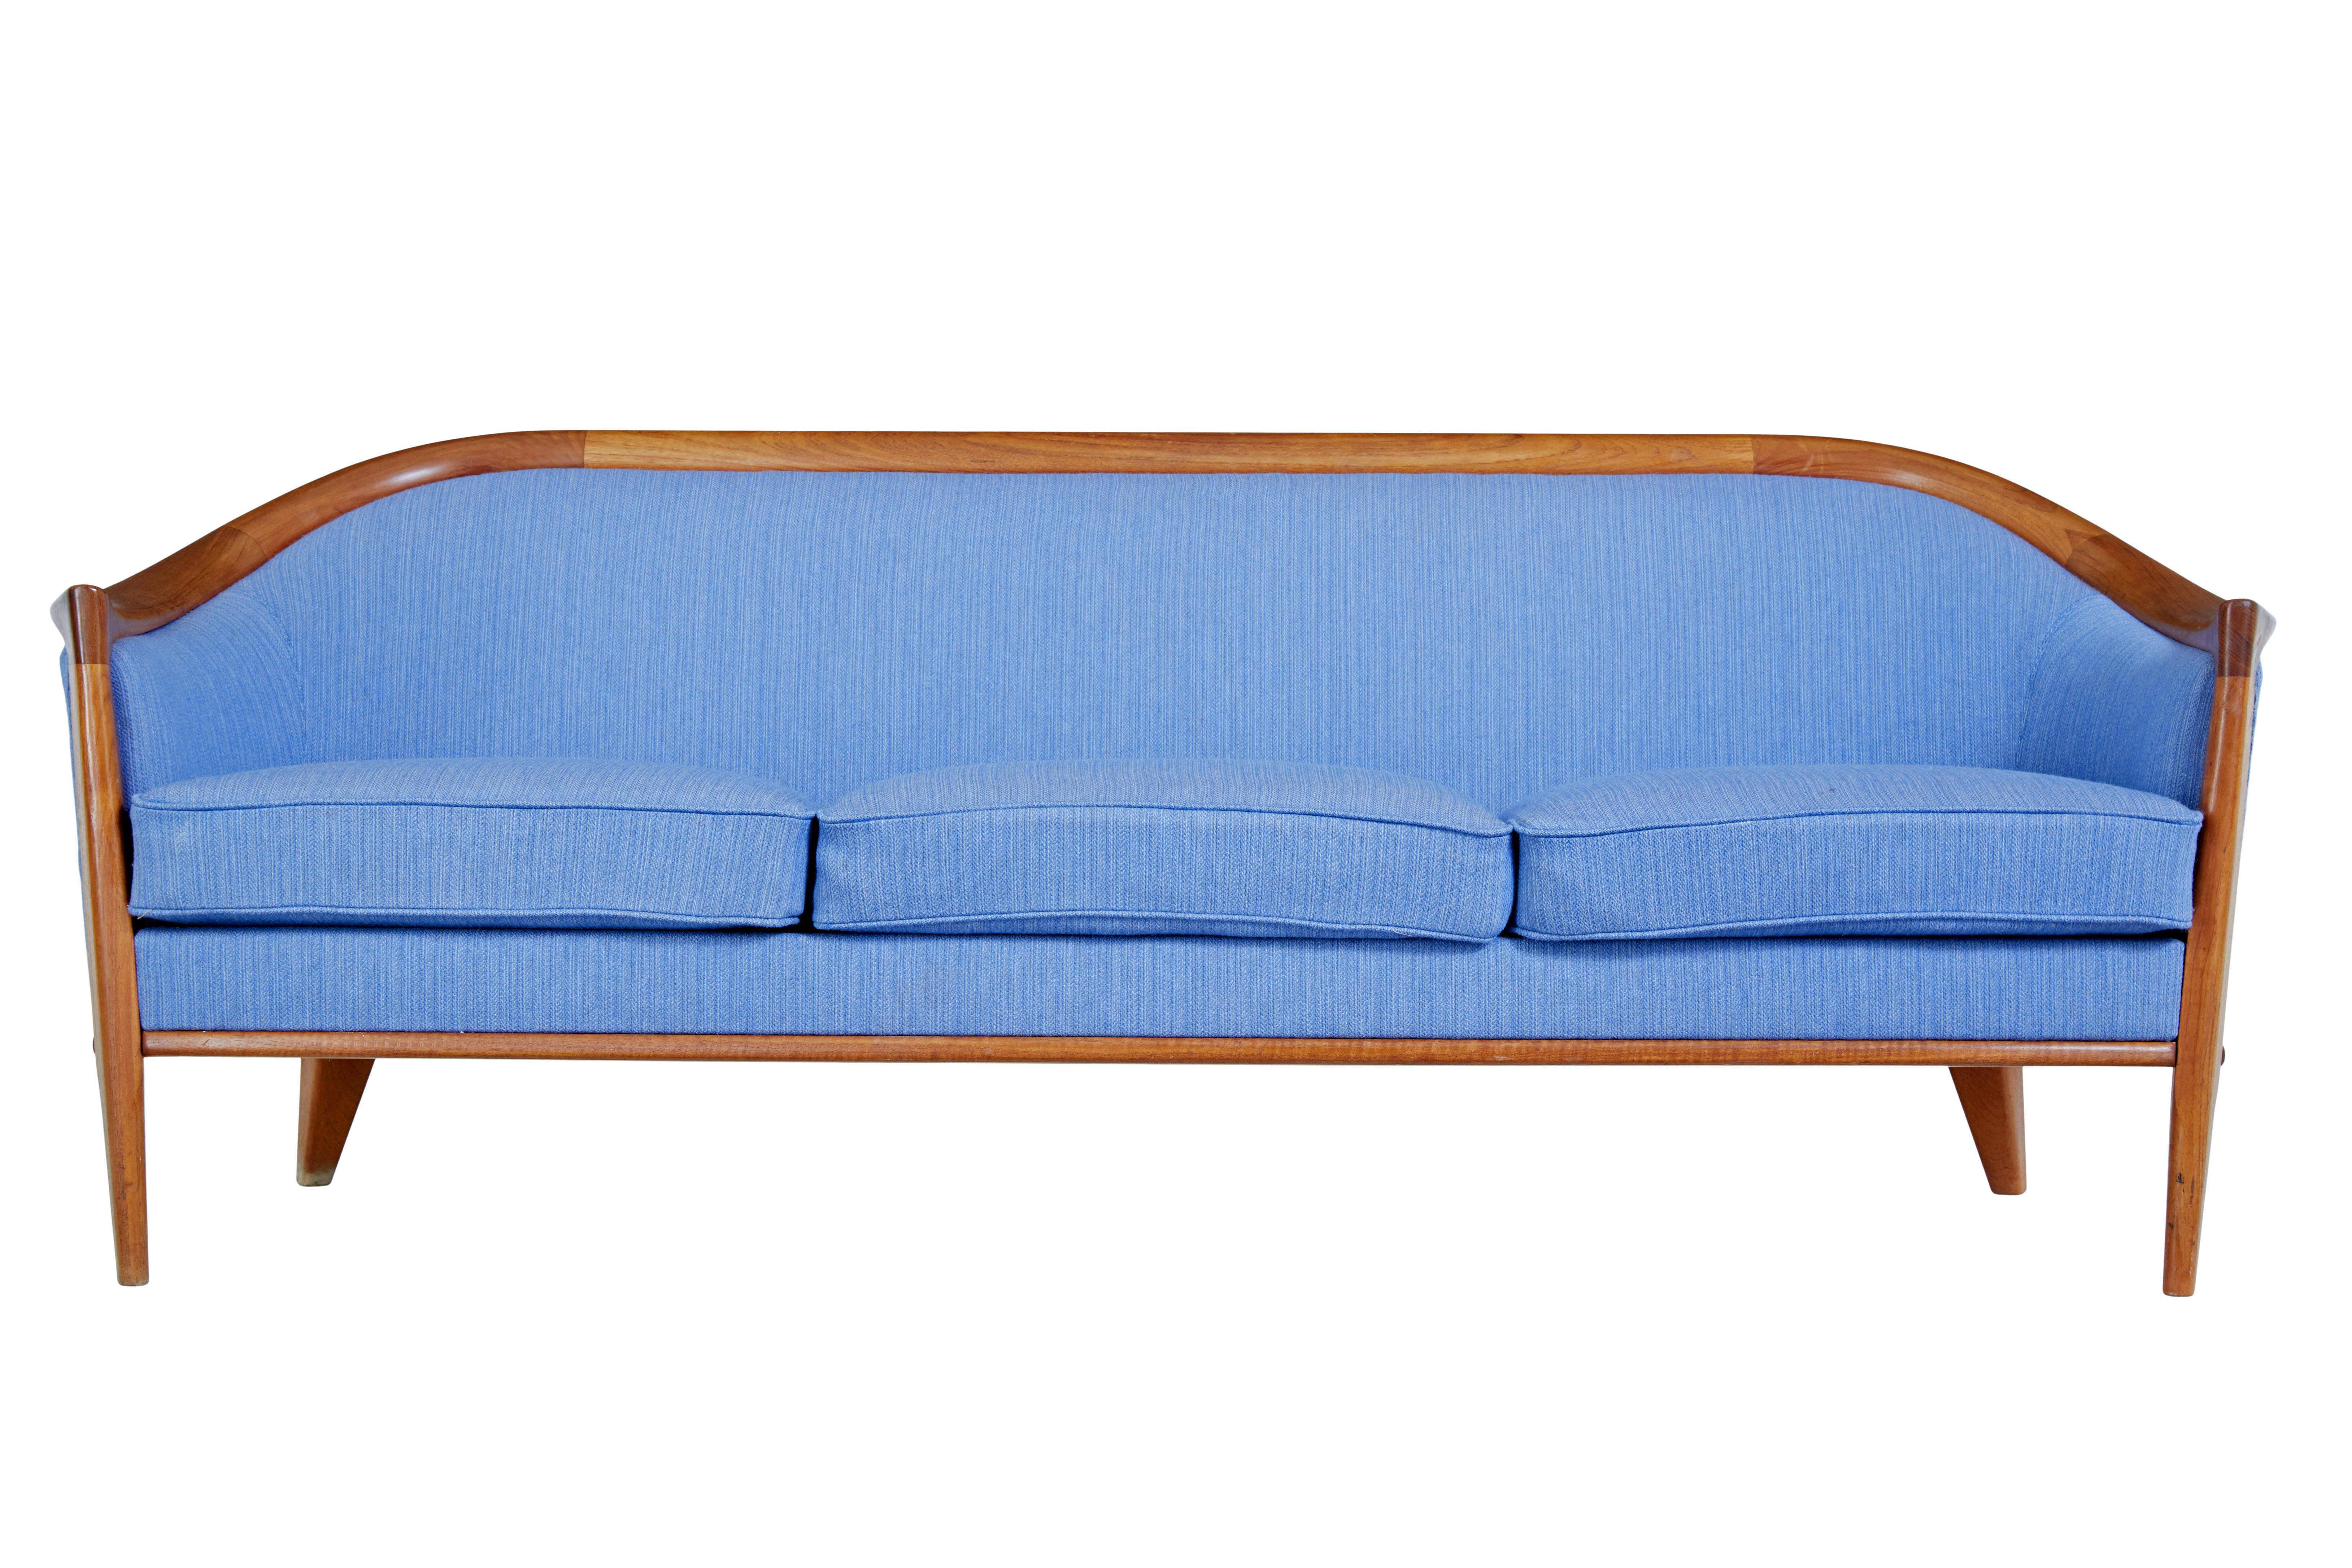 Mid century sofa and armchair by andersson circa 1960.

Here we have a sofa and armchair designed by bertil frighagen for broderna andersson.  Know as the aristocrat model and well recognised for its horseshoe shaped backs.

Made with teak frames,